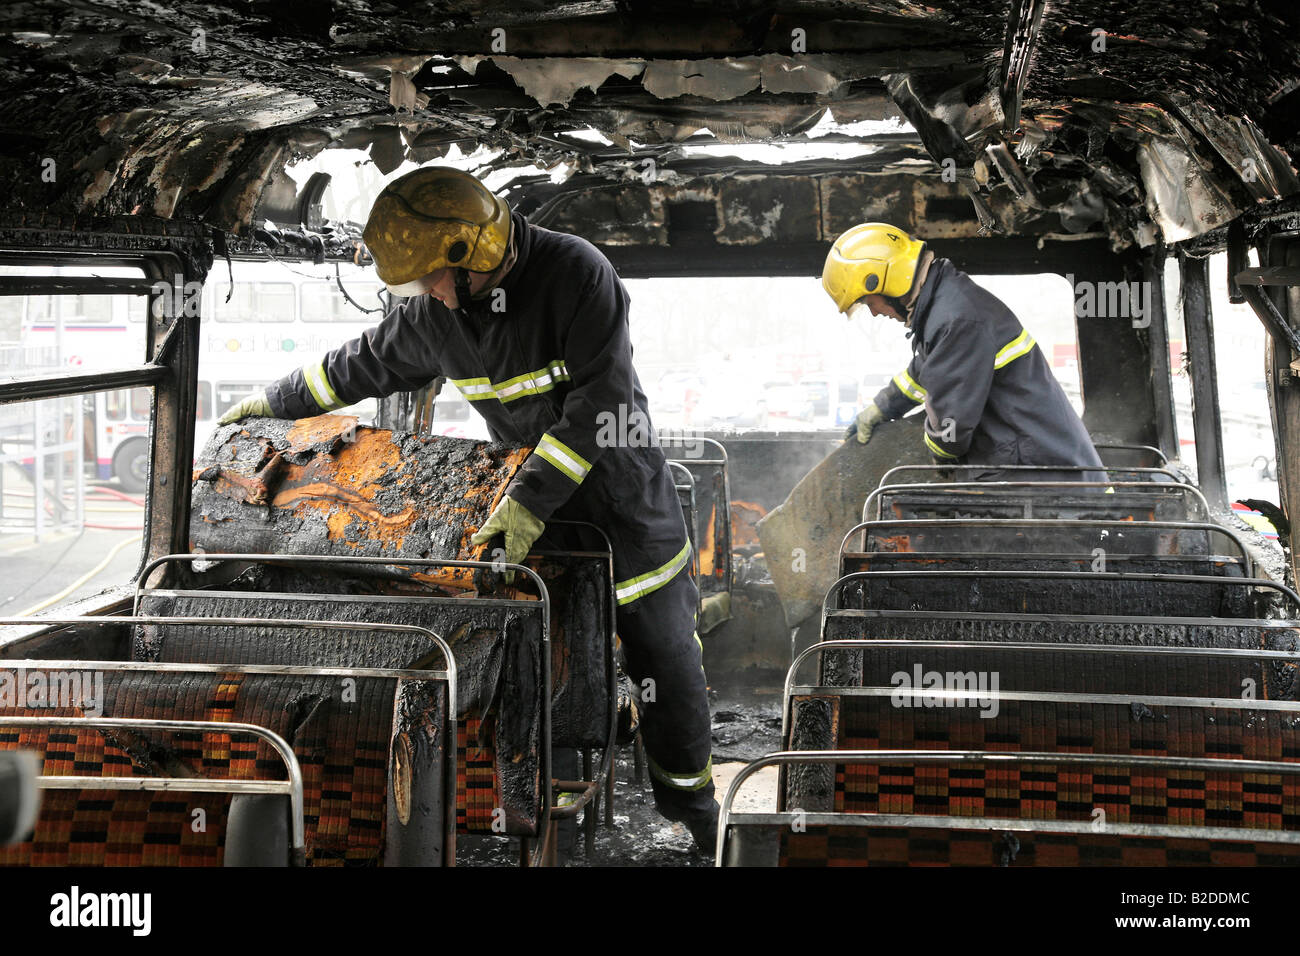 Firemen damping down and clearing fire damaged bus Stock Photo